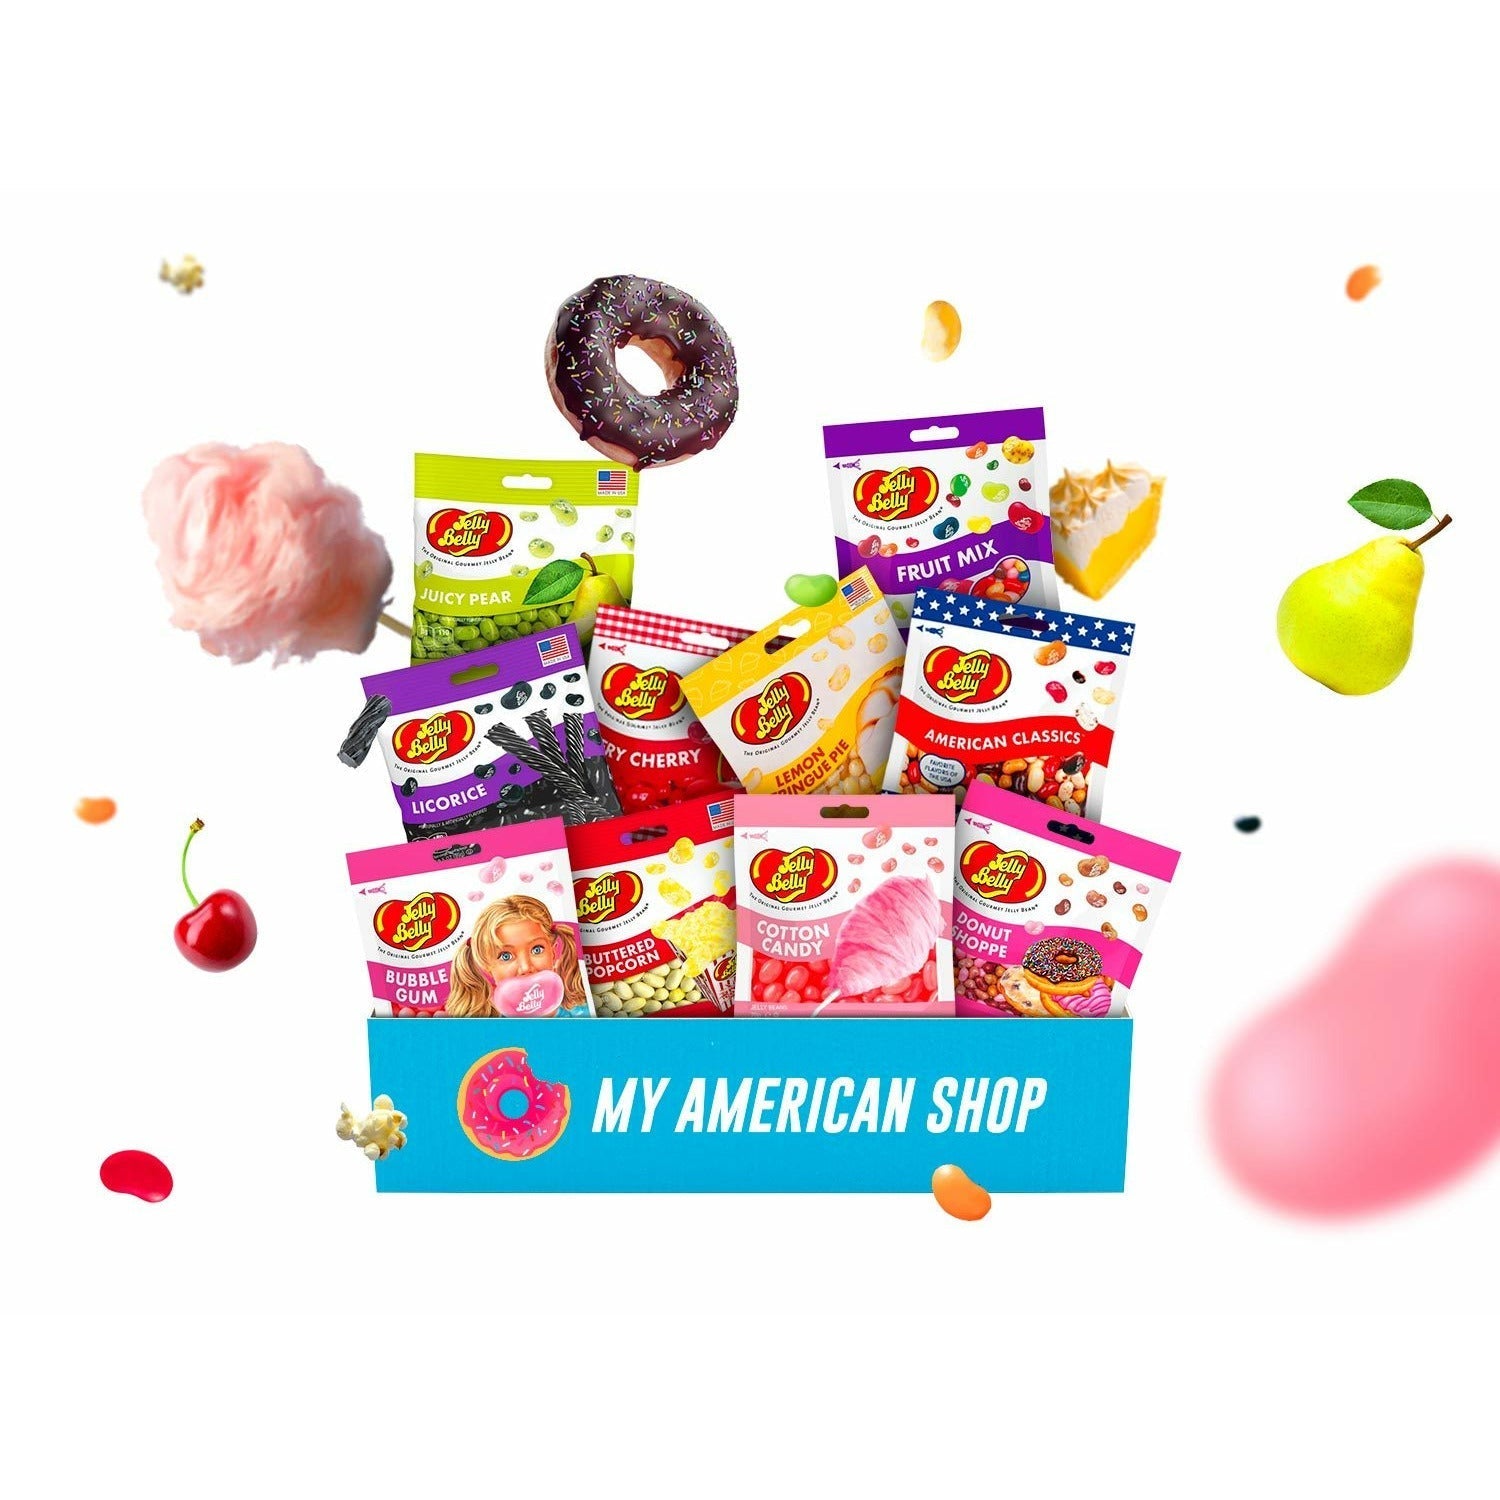 PACK JELLY BELLY - My American Shop